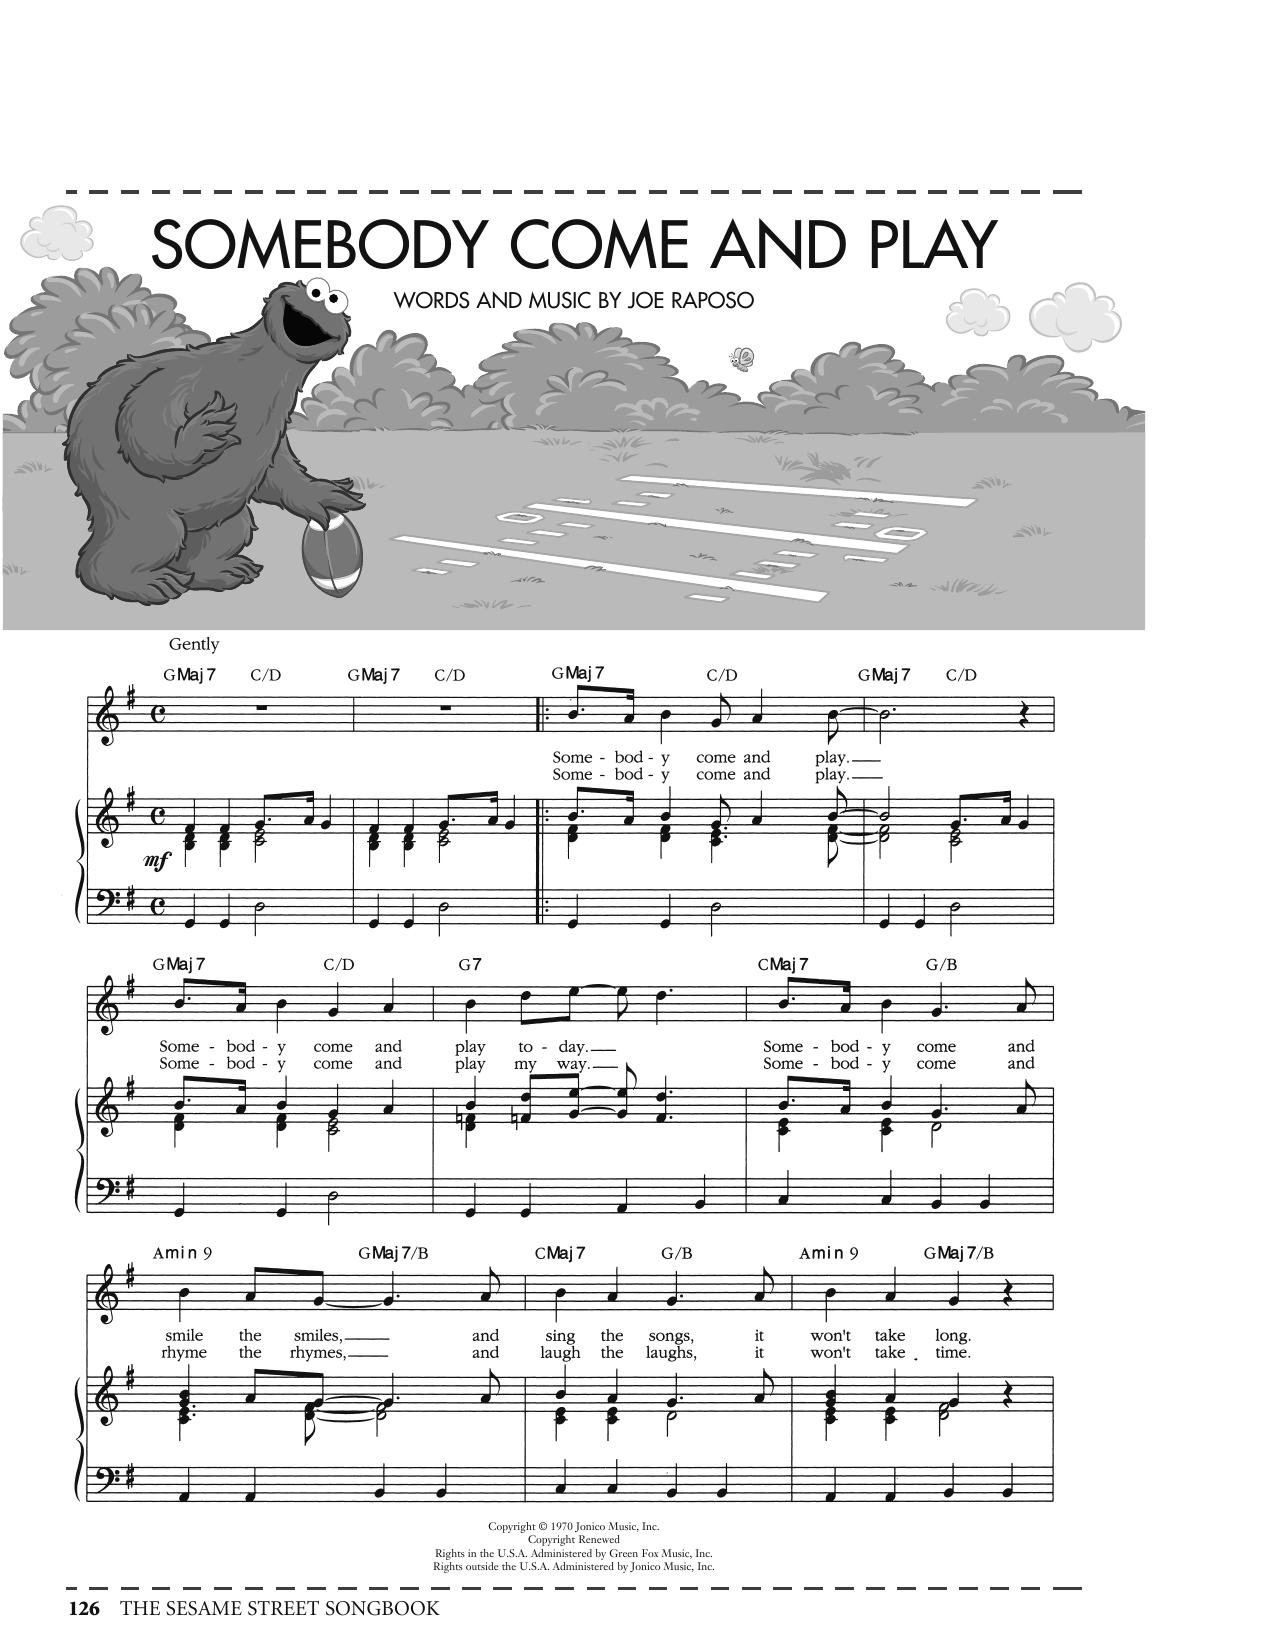 Joe Raposo Somebody Come And Play (from Sesame Street) sheet music notes printable PDF score